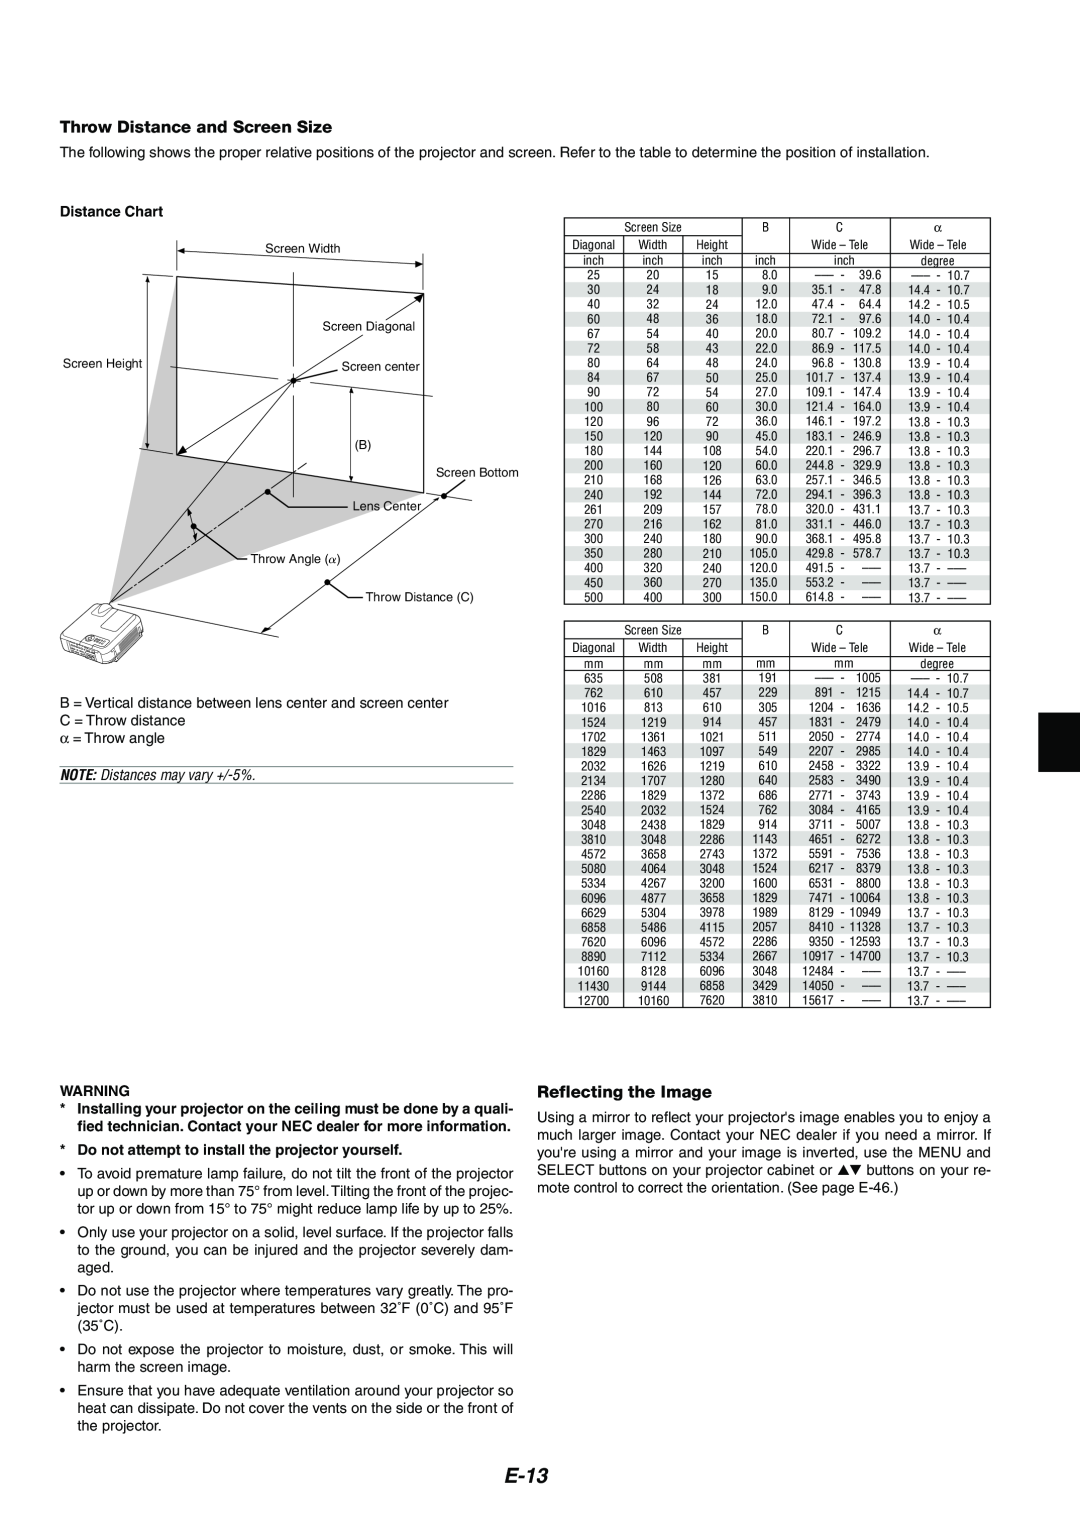 NEC MT1075/MT1065 user manual E-13, Throw Distance and Screen Size, Reflecting the Image, Distance Chart 